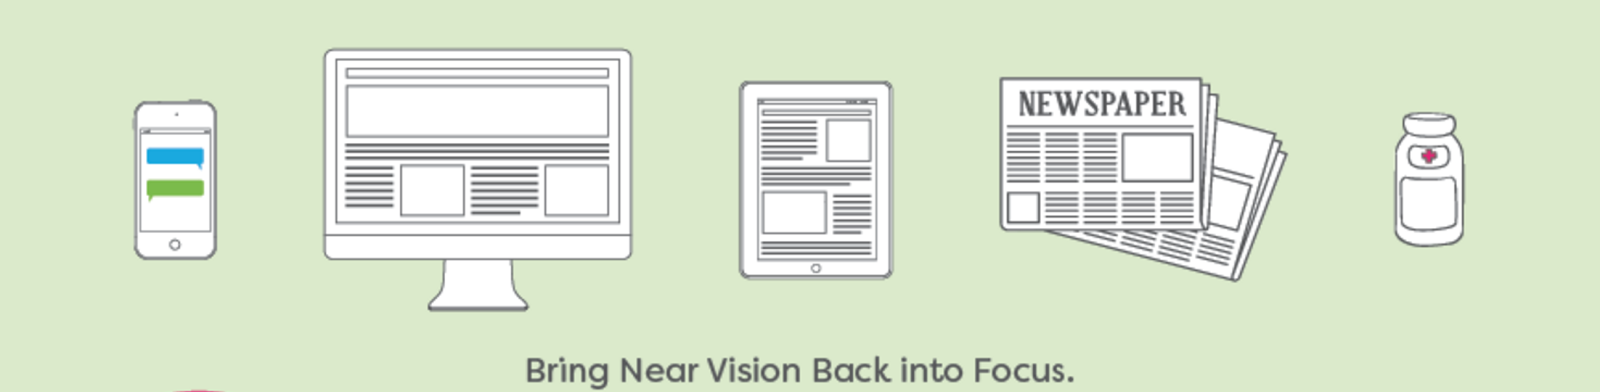 Bring Near Vision Back into Focus